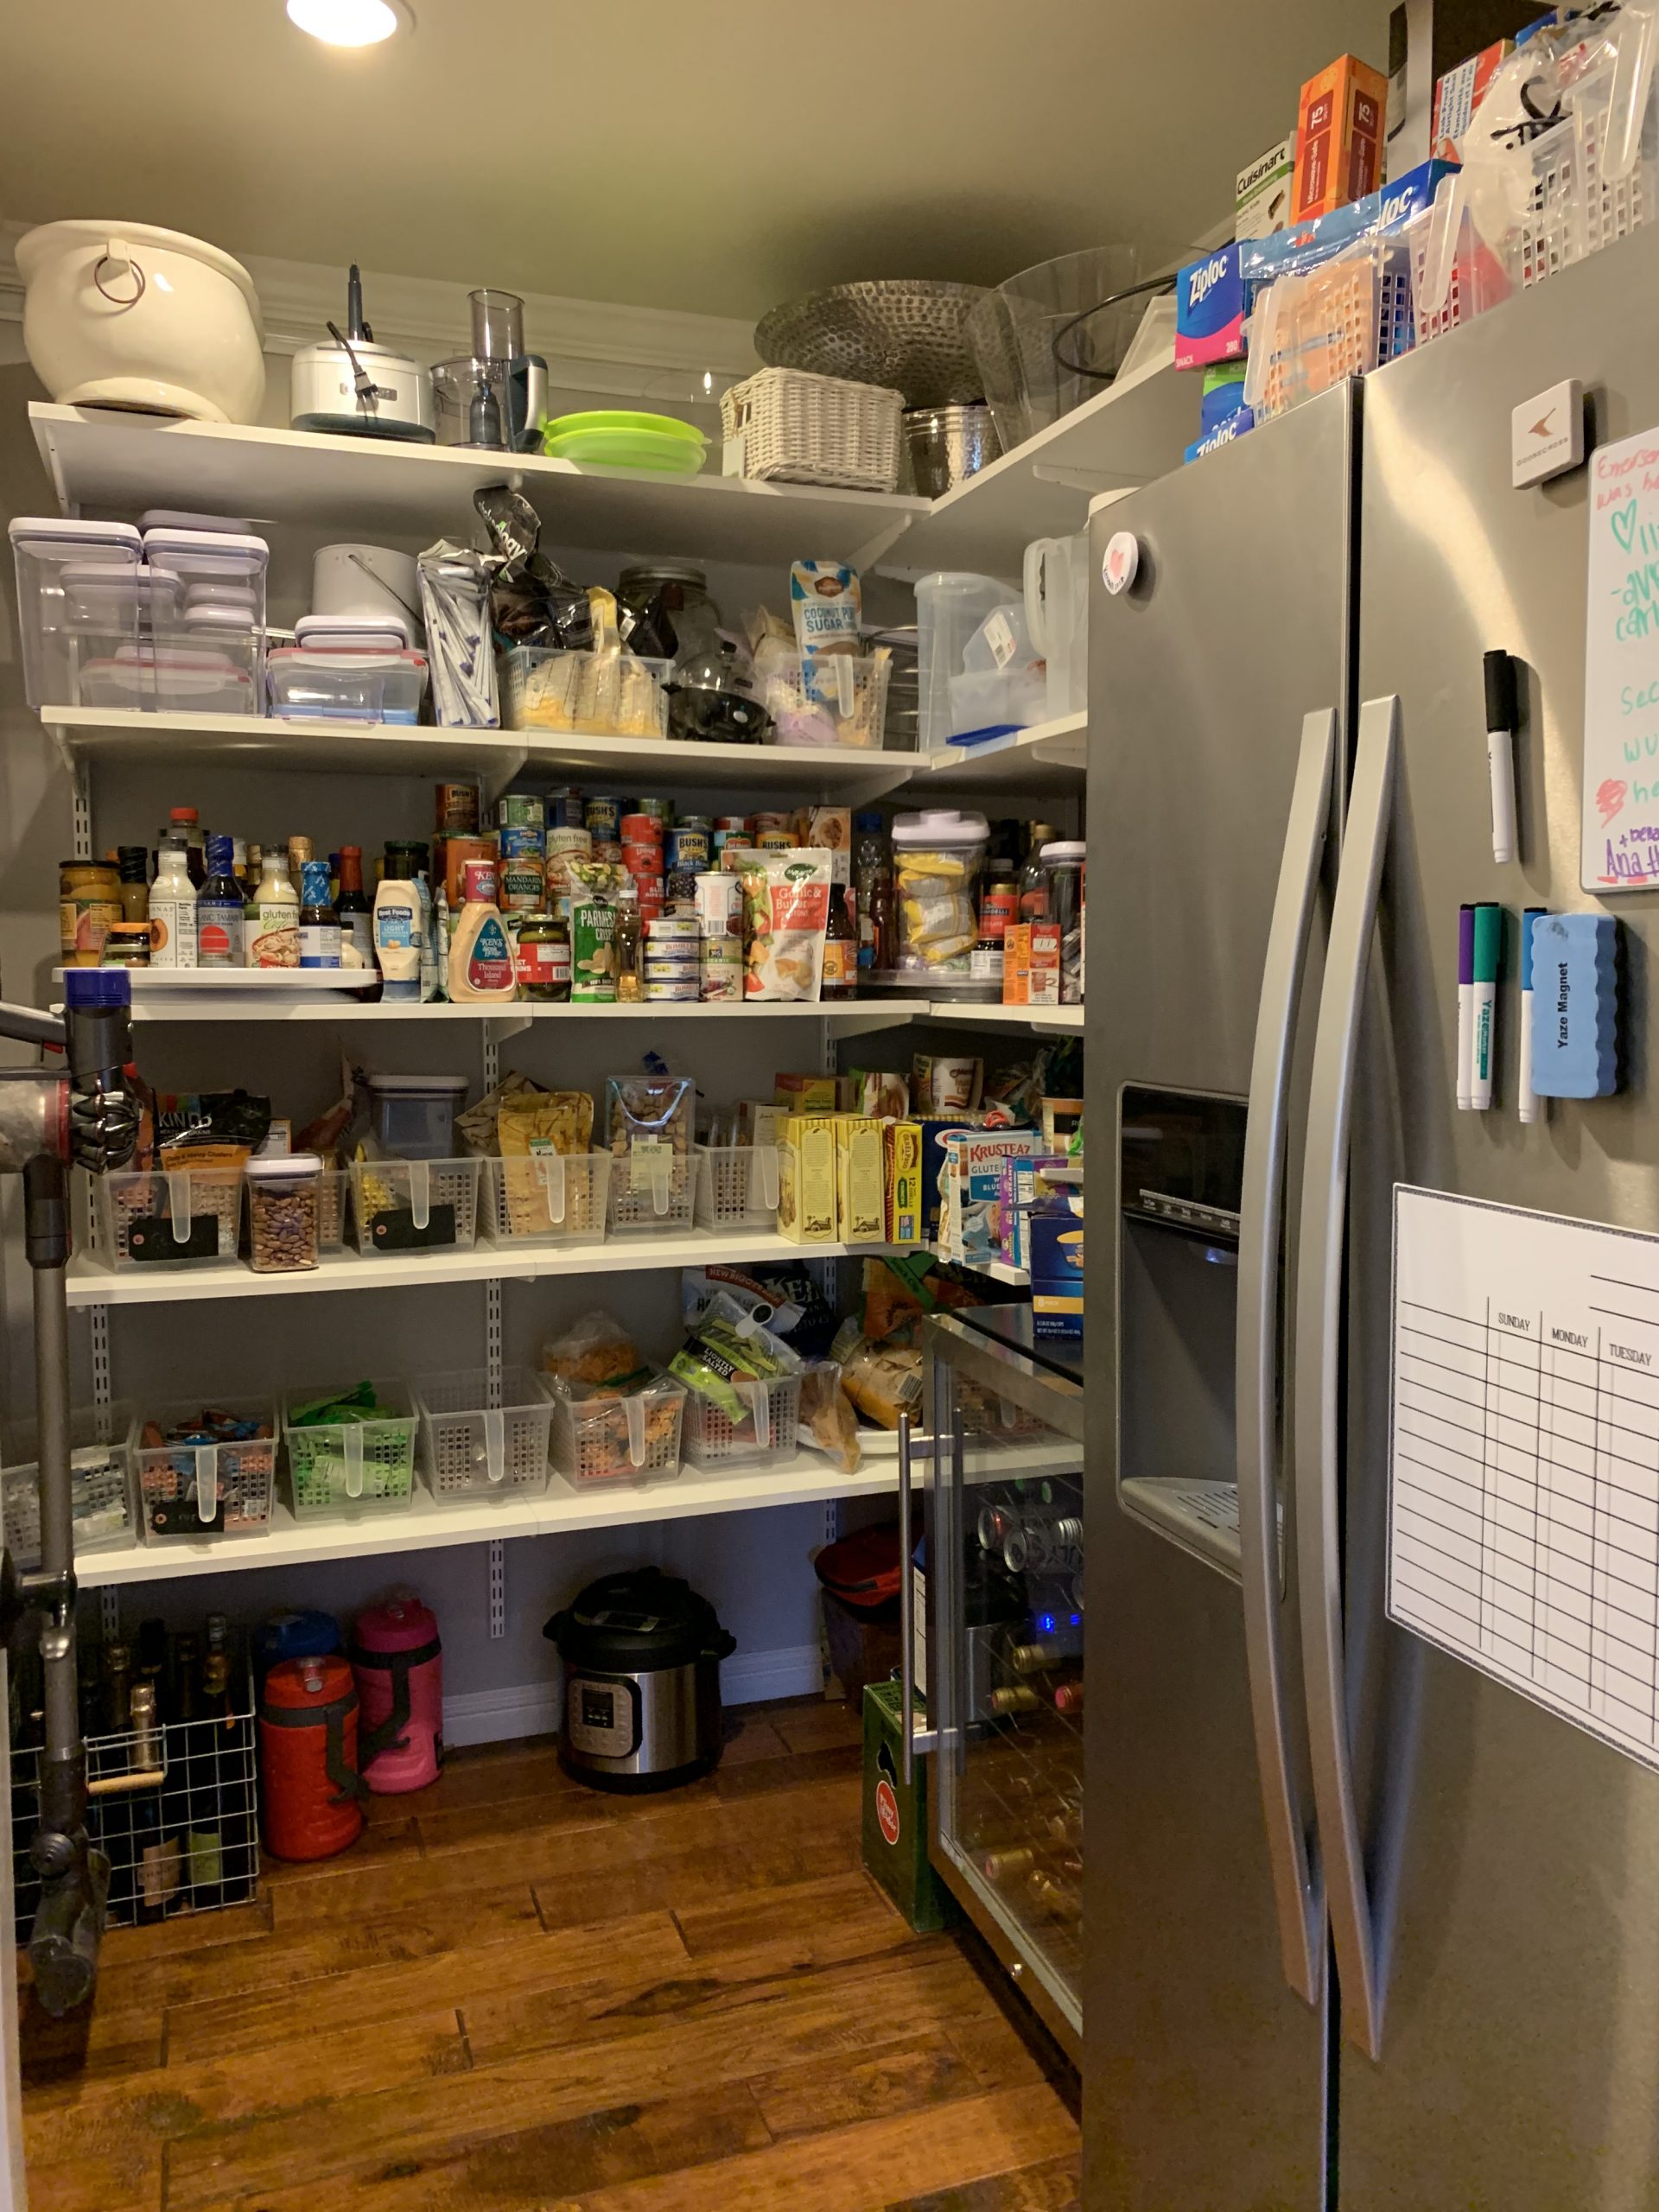 https://simplyorganized.me/wp-content/uploads/2020/01/pantry-before-getting-organized-scaled.jpg